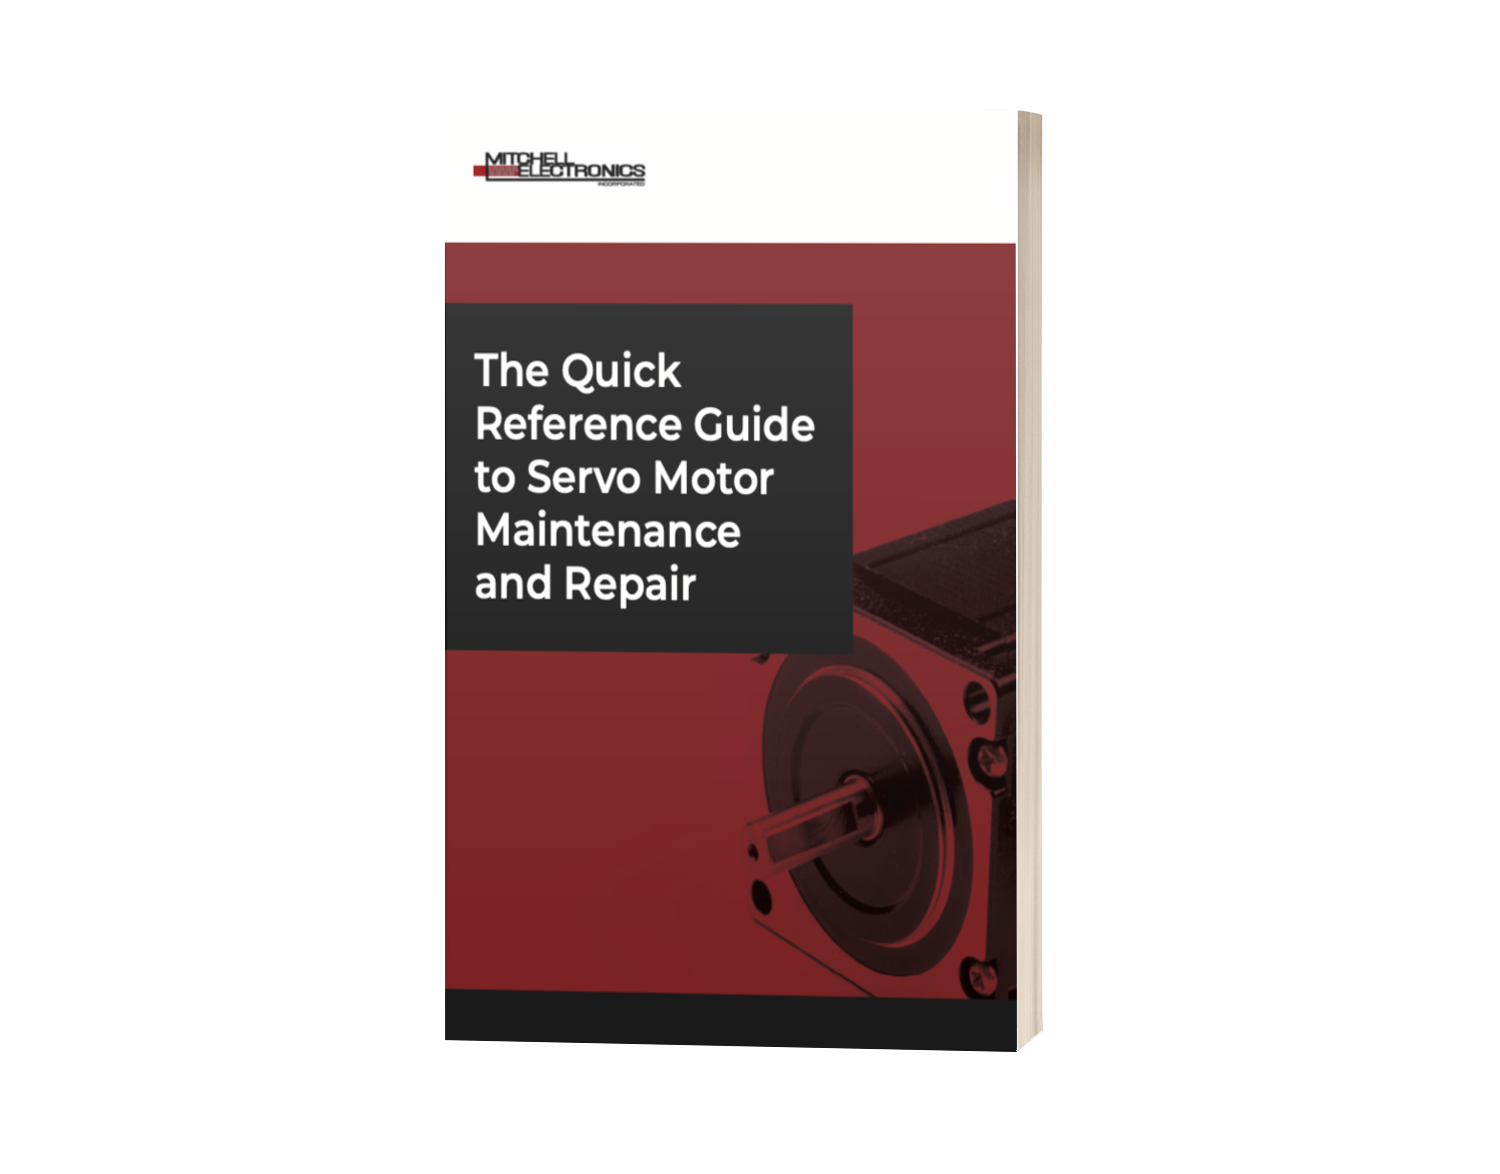 The Quick Reference Guide to Servo Motor Maintenance and Repair